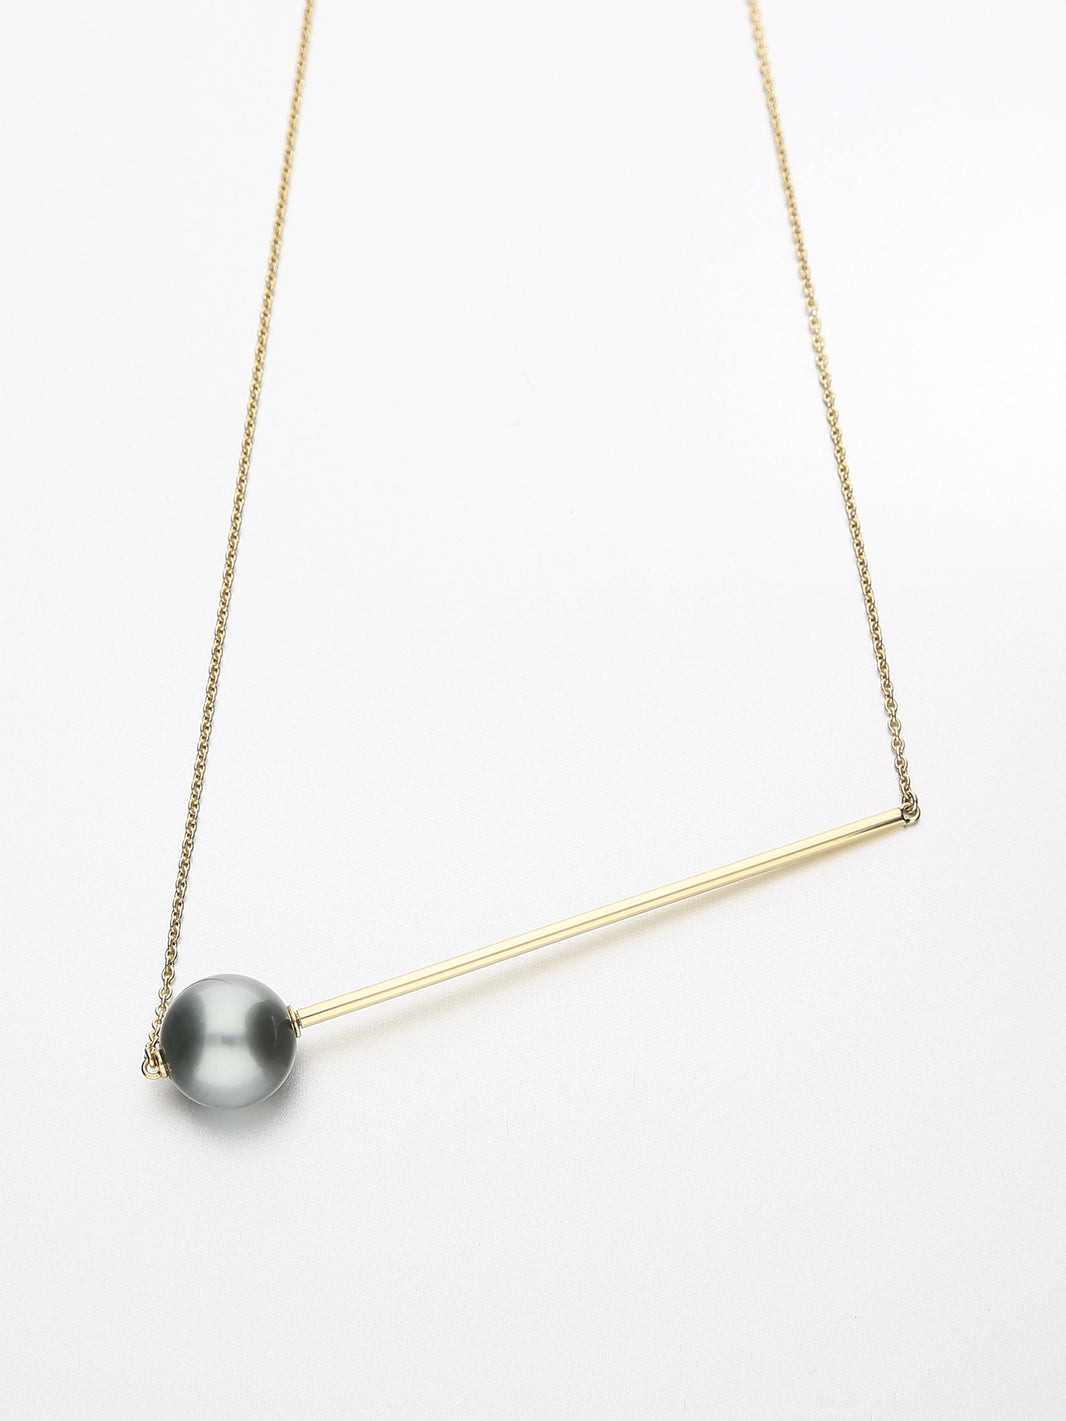 Abacus Pearl Necklace, Yellow gold with dark Tahitian pearl 11mm